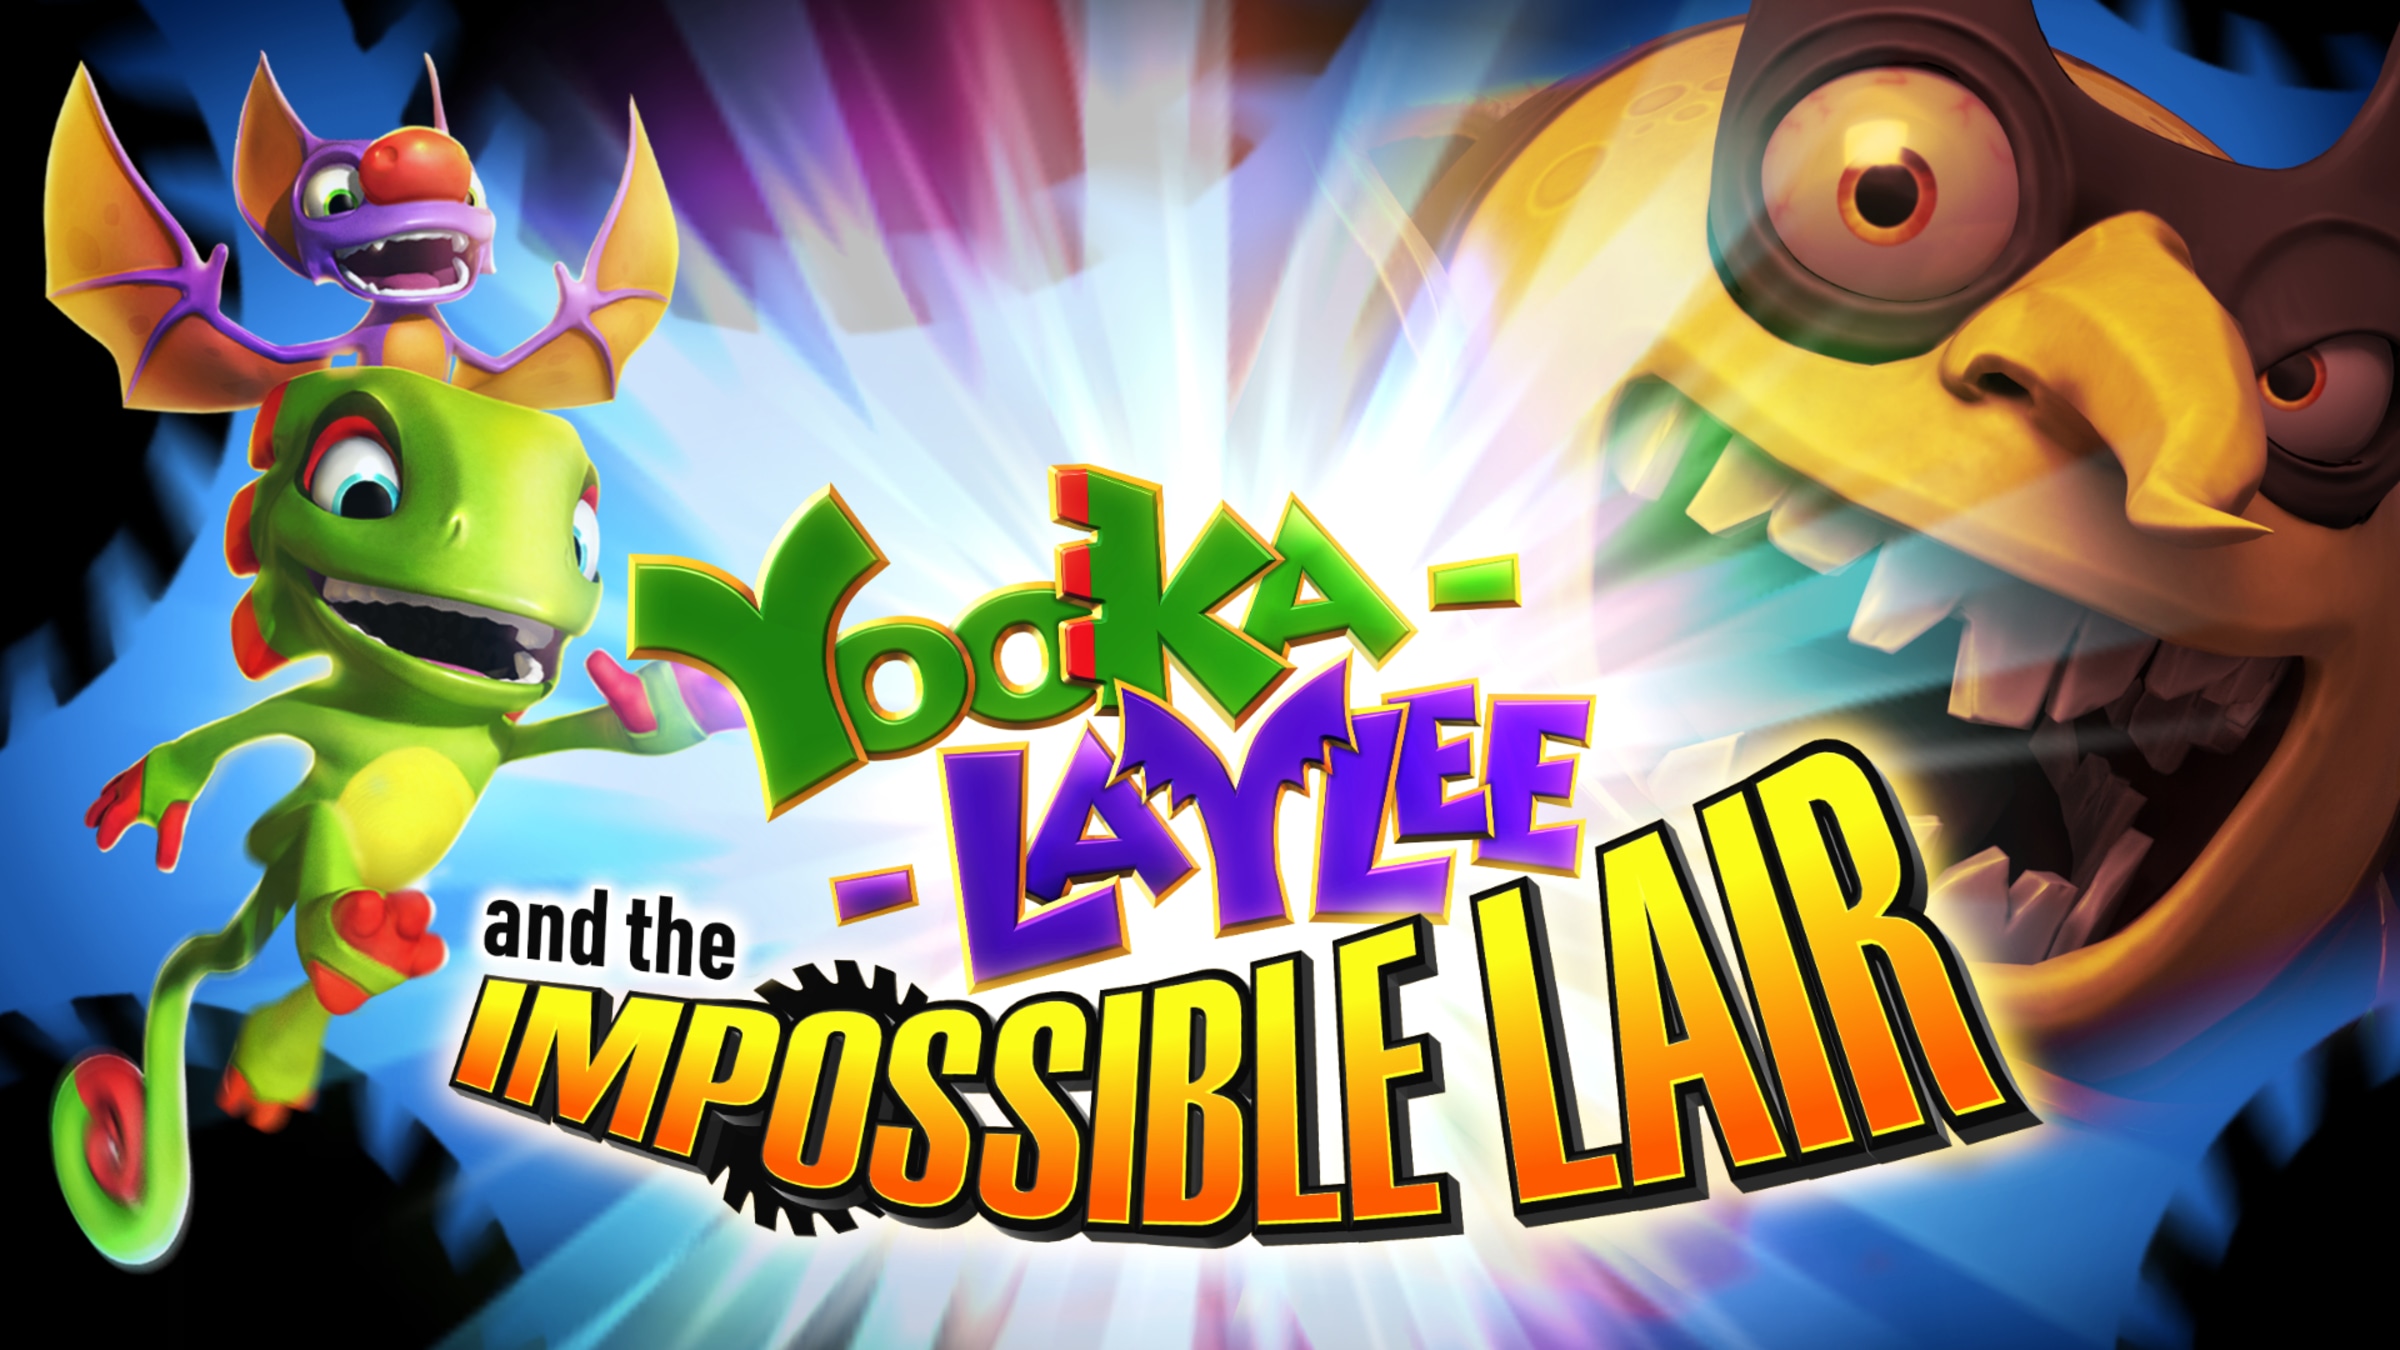 Yooka-Laylee and the Impossible Lair (Nintendo switch)